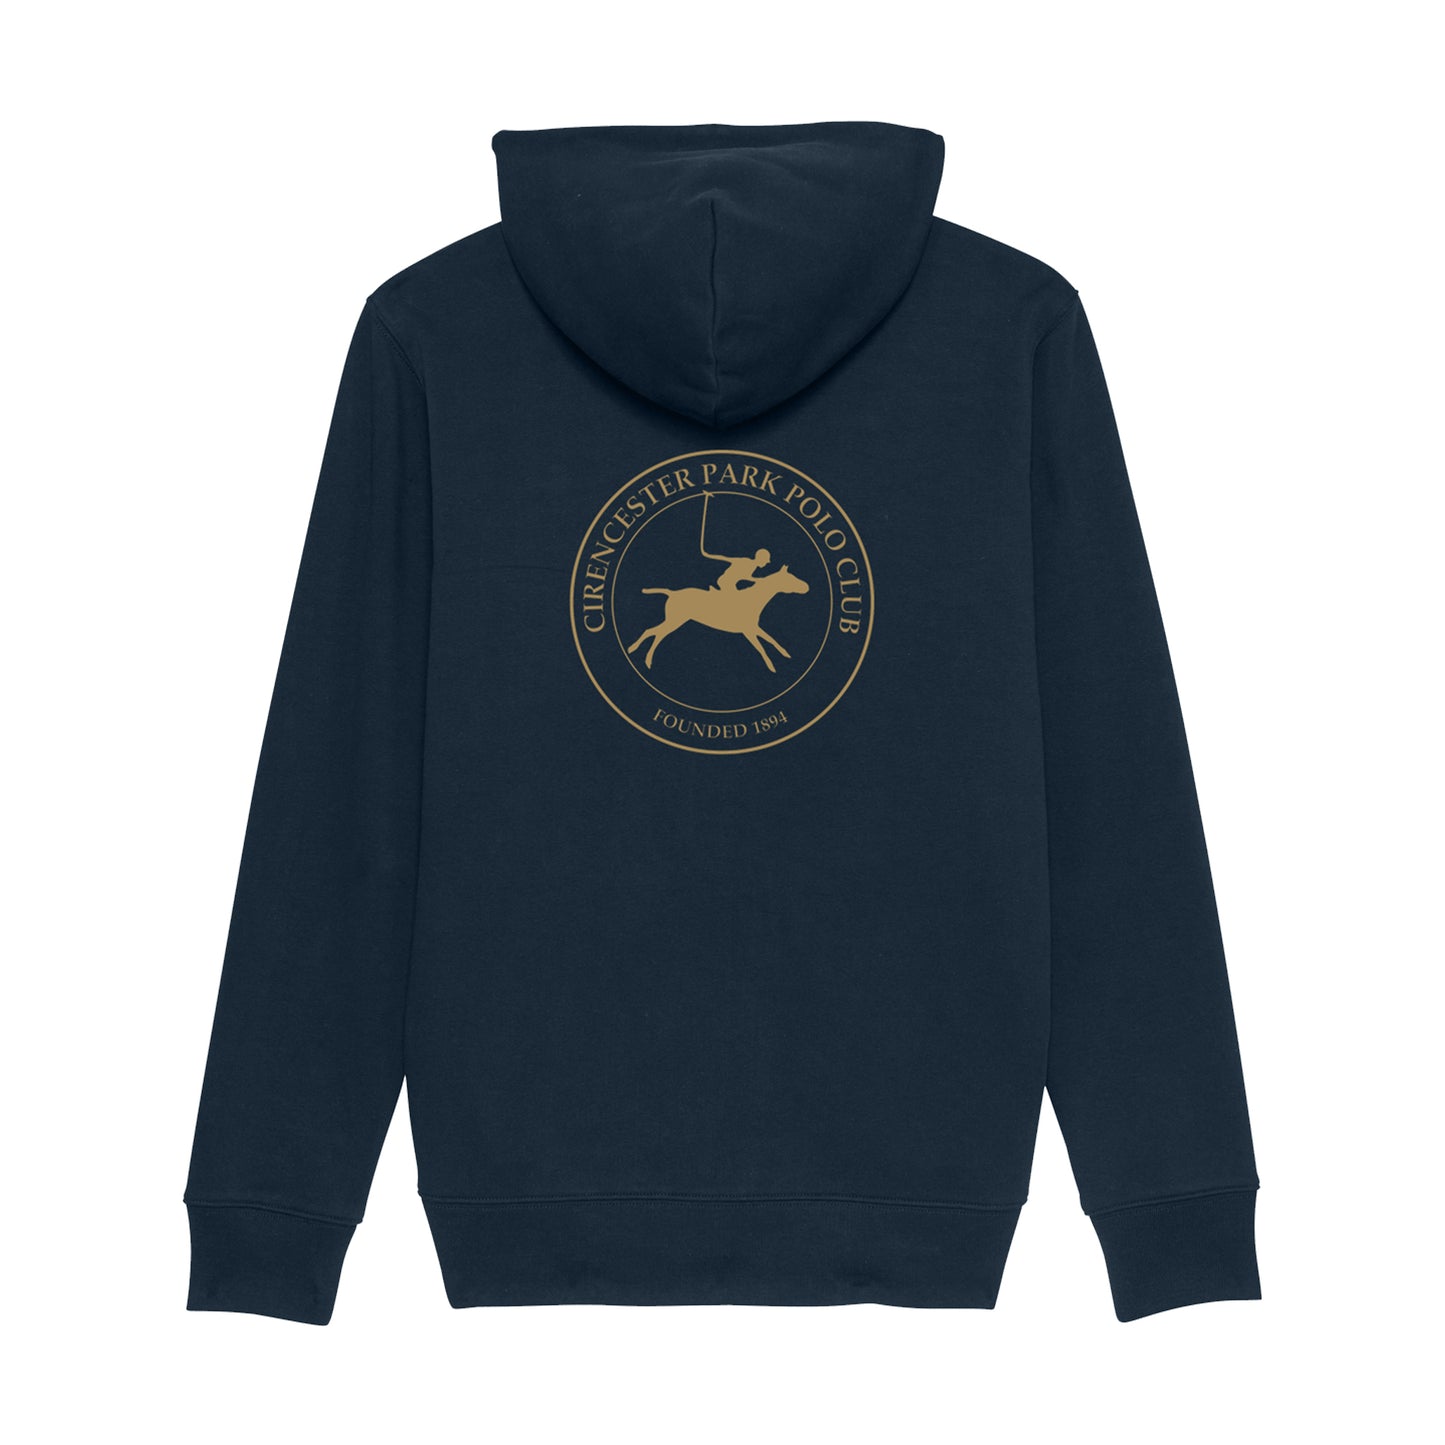 Cirencester Park Polo Club Hoodie - Unisex